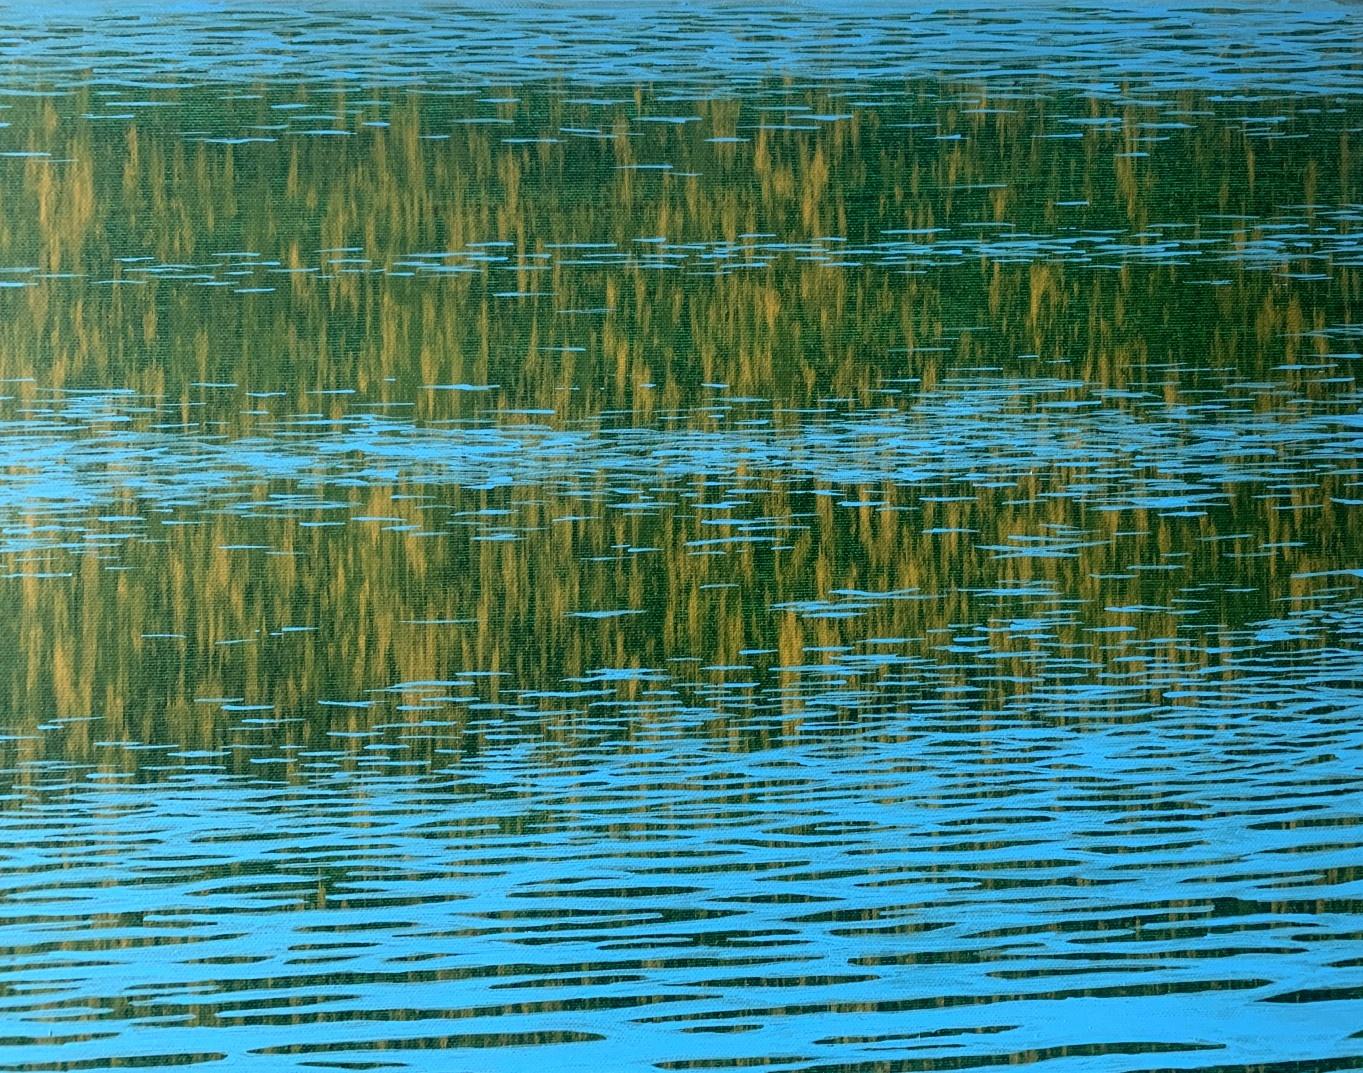 Contemporary acrylic on canvas painting by Polish artist Tomek Mistak. Painting depicts landscape reflection on the water surface. Painting is almost an abstraction. Main colors are blue and green.

TOMEK MISTAK (born 1978) 
In 2005 he obtained a